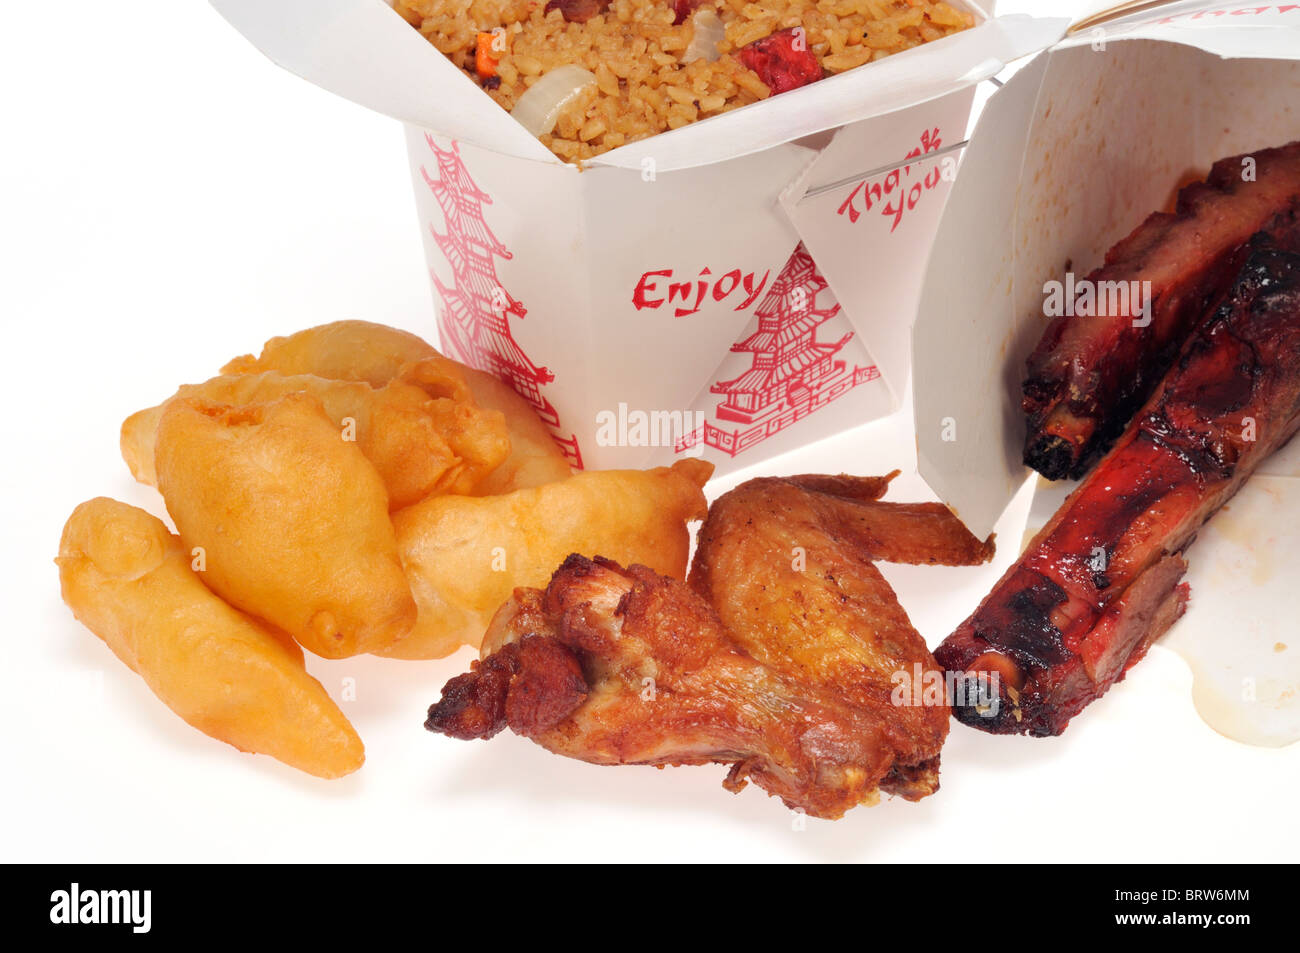 Chinese food take away meal boxes or cartons of pork fried rice with chicken fingers, chicken wings & pork spare ribs on white background. Stock Photo